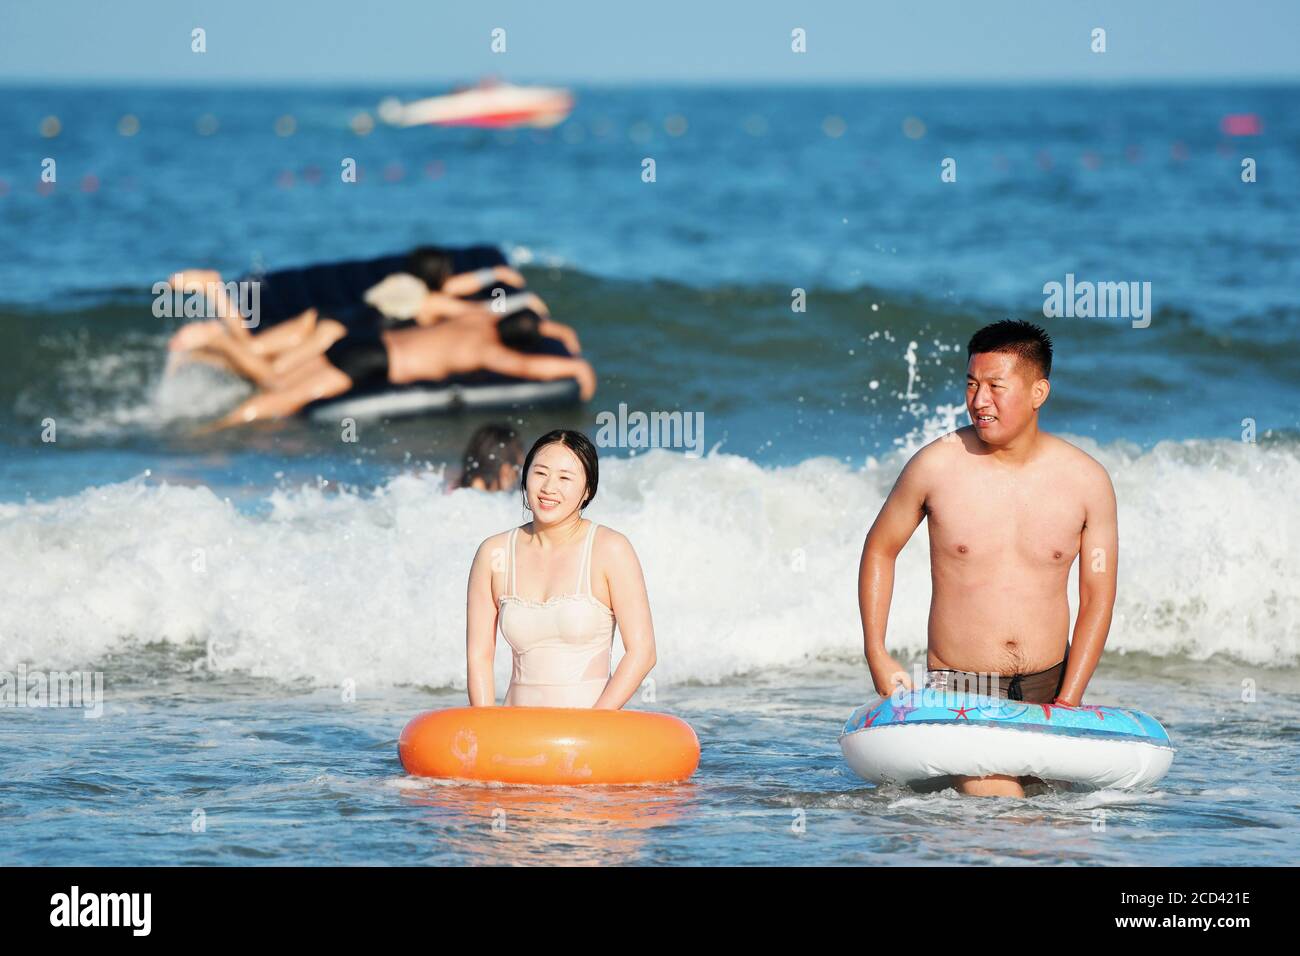 Tourists flock to the Golden Beach, a local oceanic scenic spot, to enjoy aquatic activities to relieve summer heat, West Coast New Area, Qingdao city Stock Photo